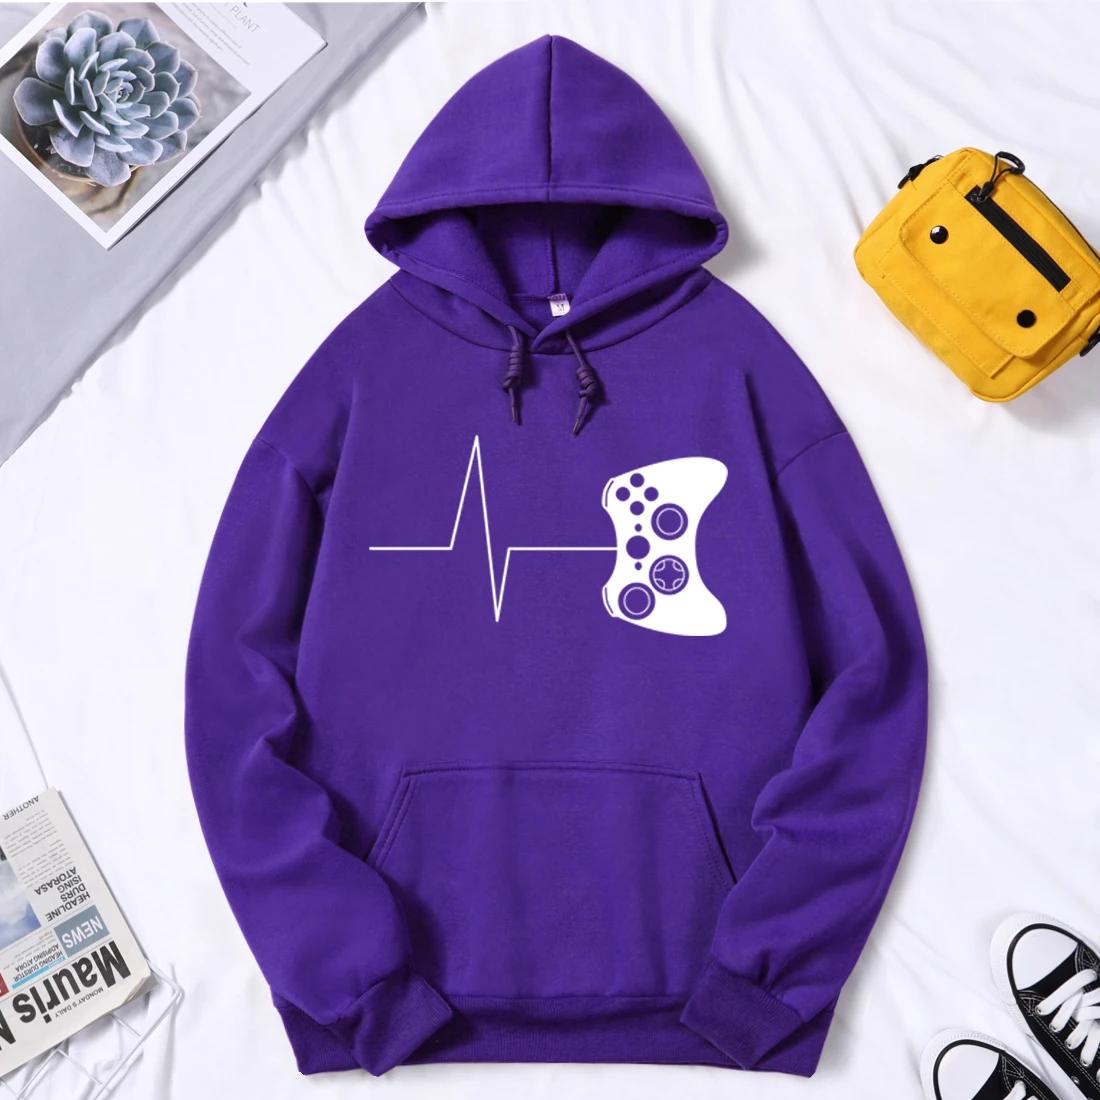 2021 men new arrival tracksuits Heartbeat of a gamer hoodies funny gaming hooded video game mma sweatshirts size S-2XL pullovers